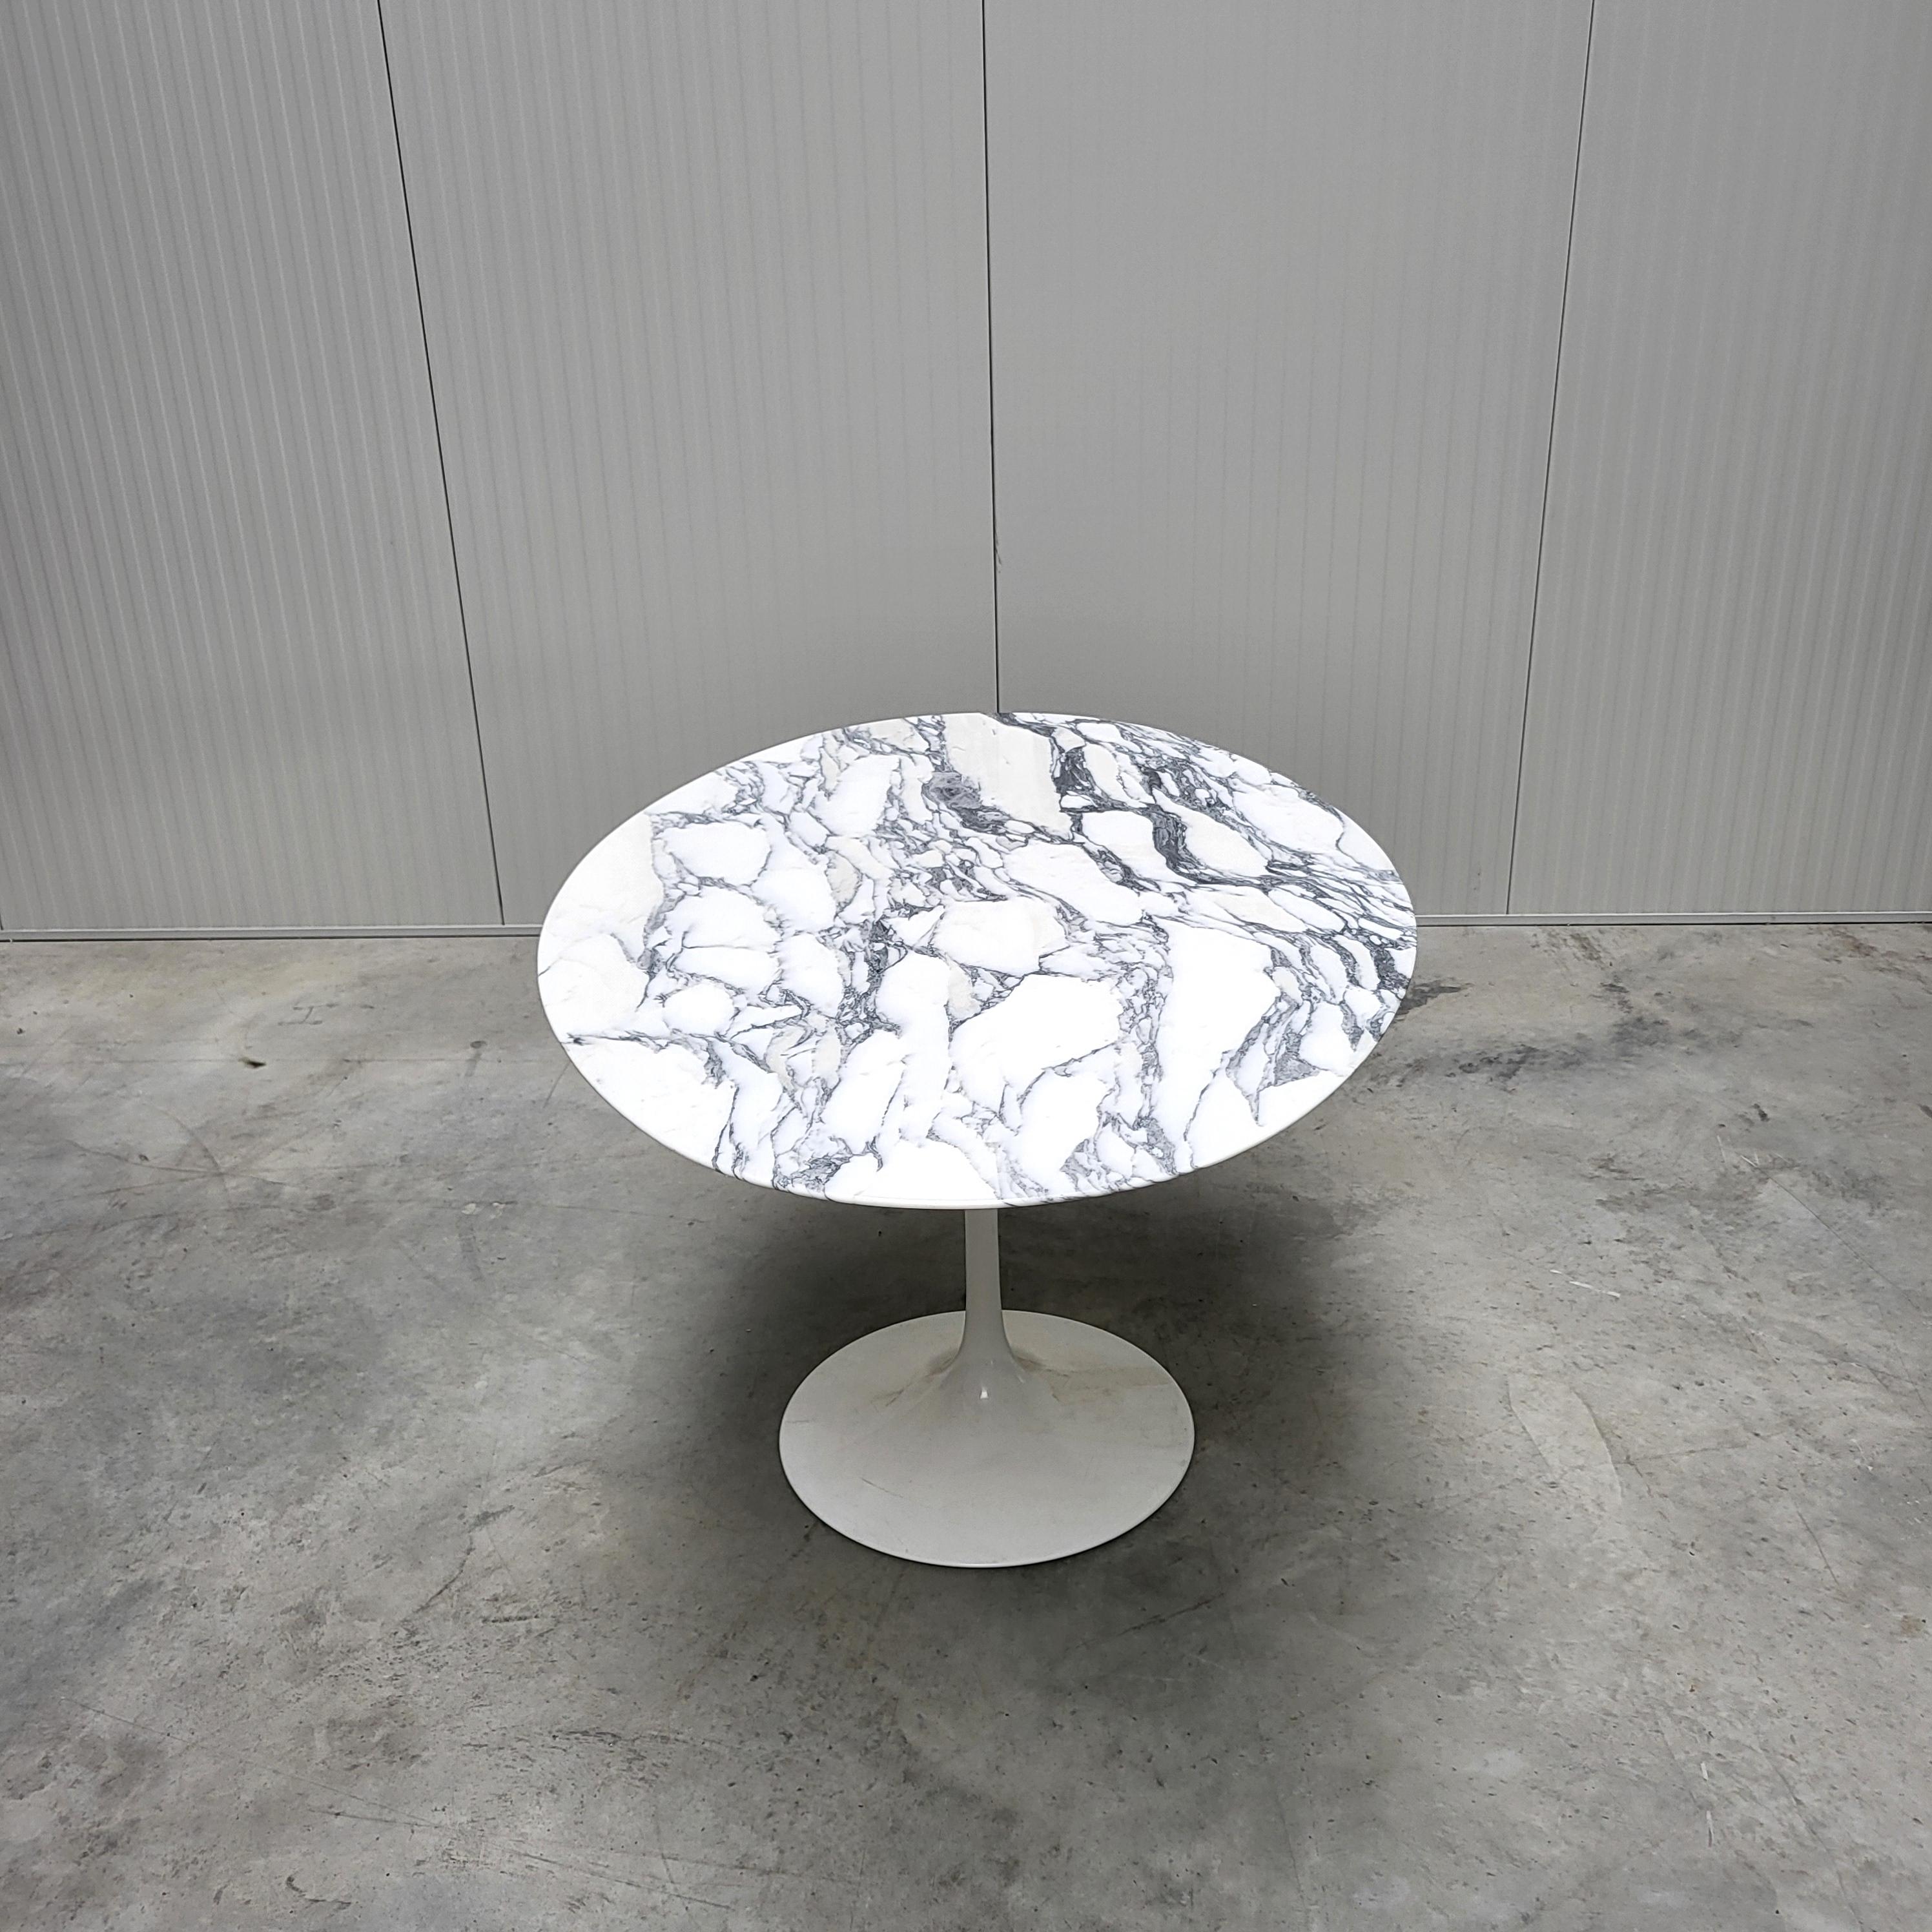 Hand-Crafted Eero Saarinen Oval Marble Tulip Dining Table by Knoll 1970s For Sale